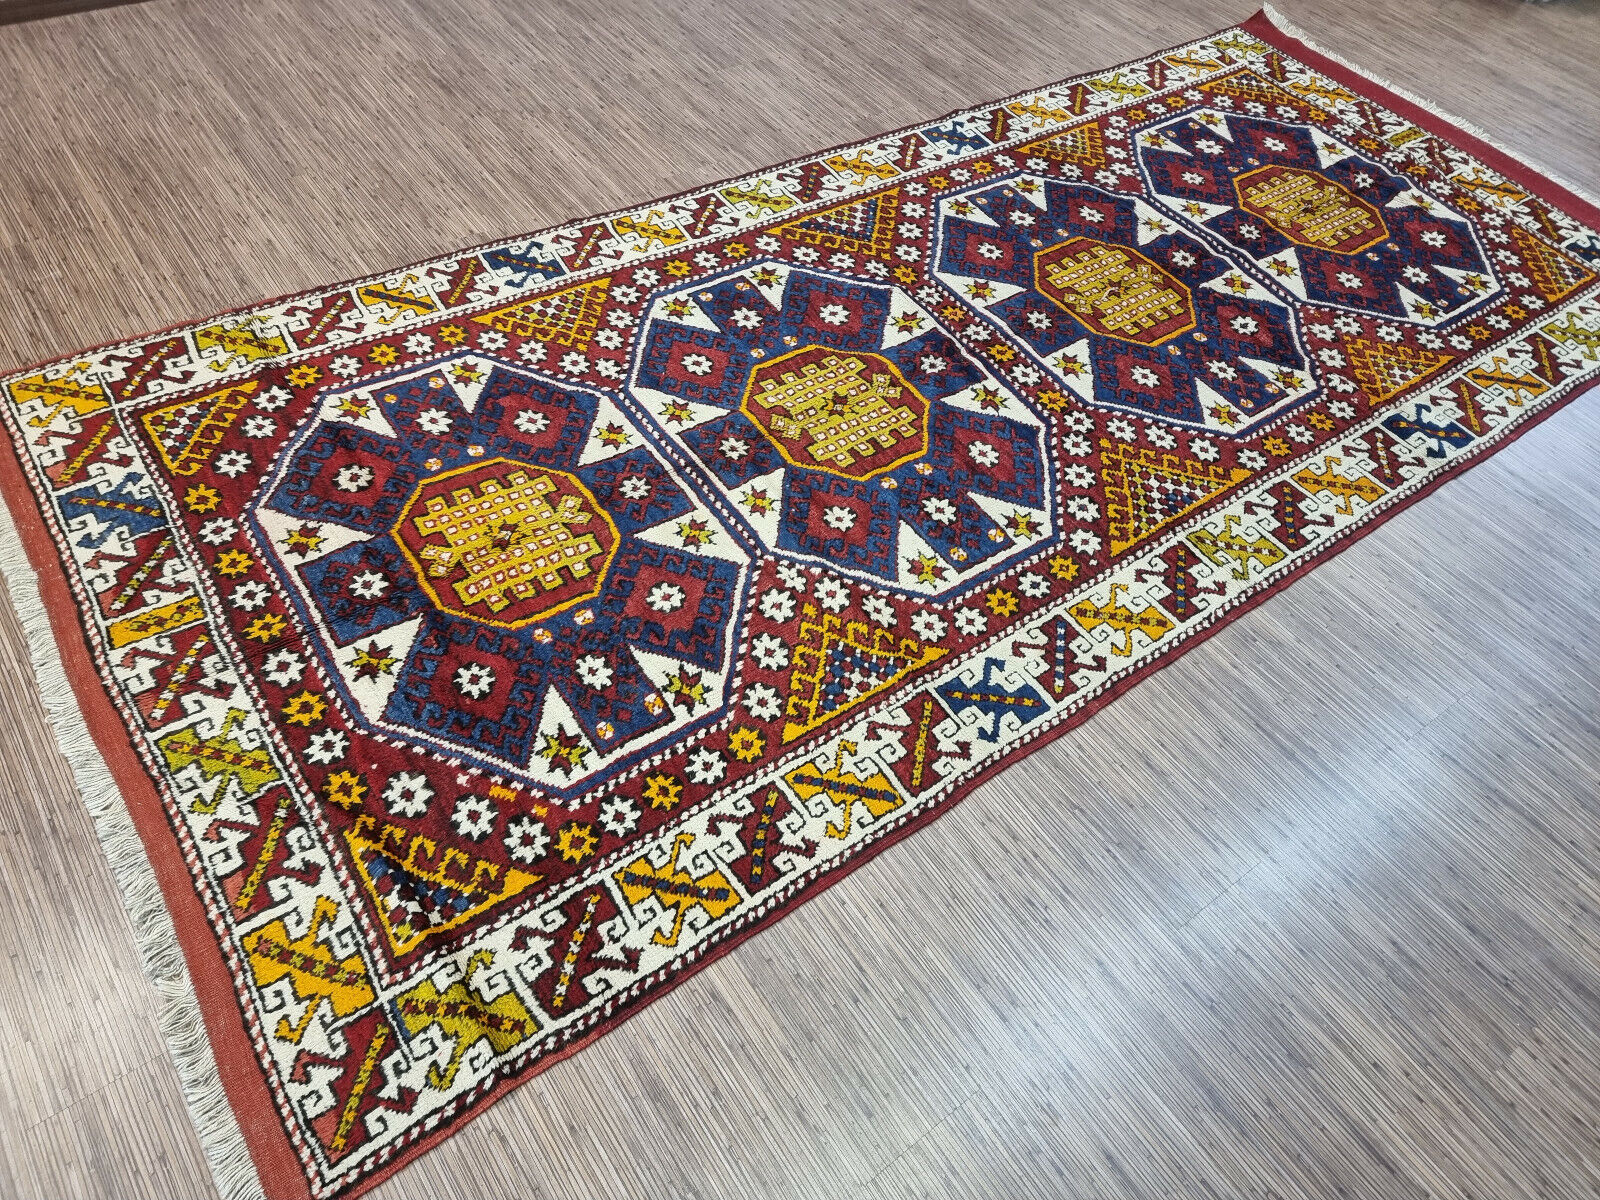 Front view of the Handmade Antique Turkish Anatolian Runner Rug highlighting its intricate designs